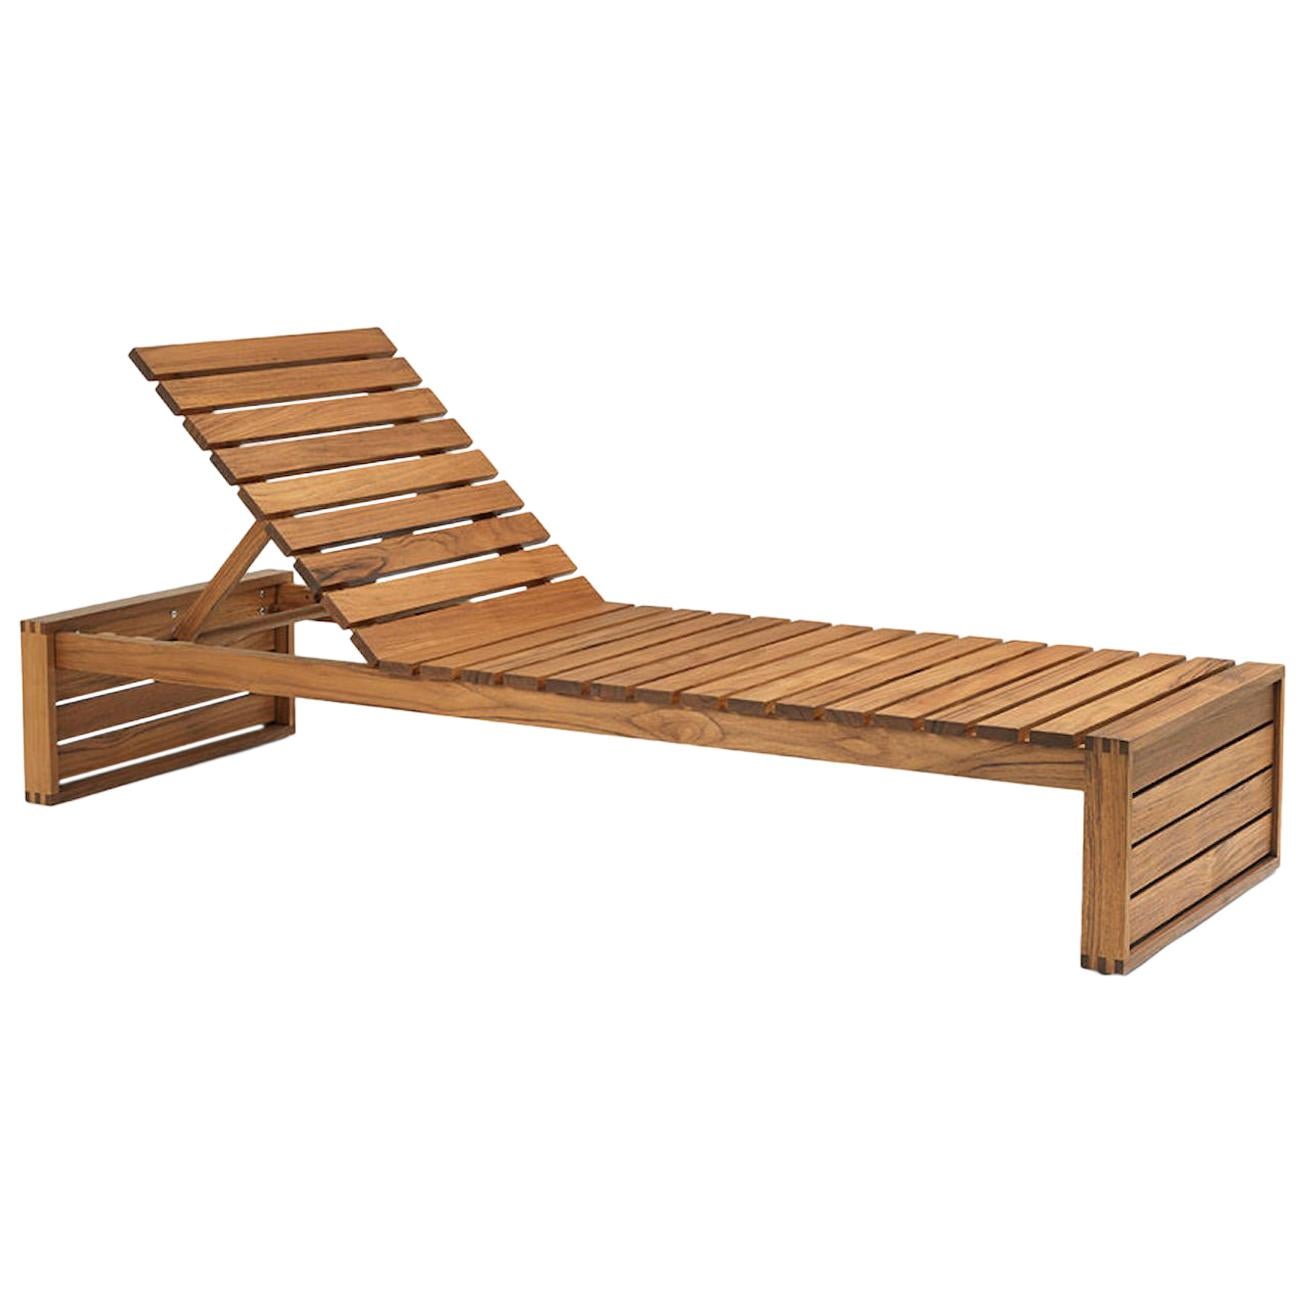 BK14 Outdoor Sunbed & Bench in Teak with Sunbrella Cushion in Charcoal or Ivory For Sale